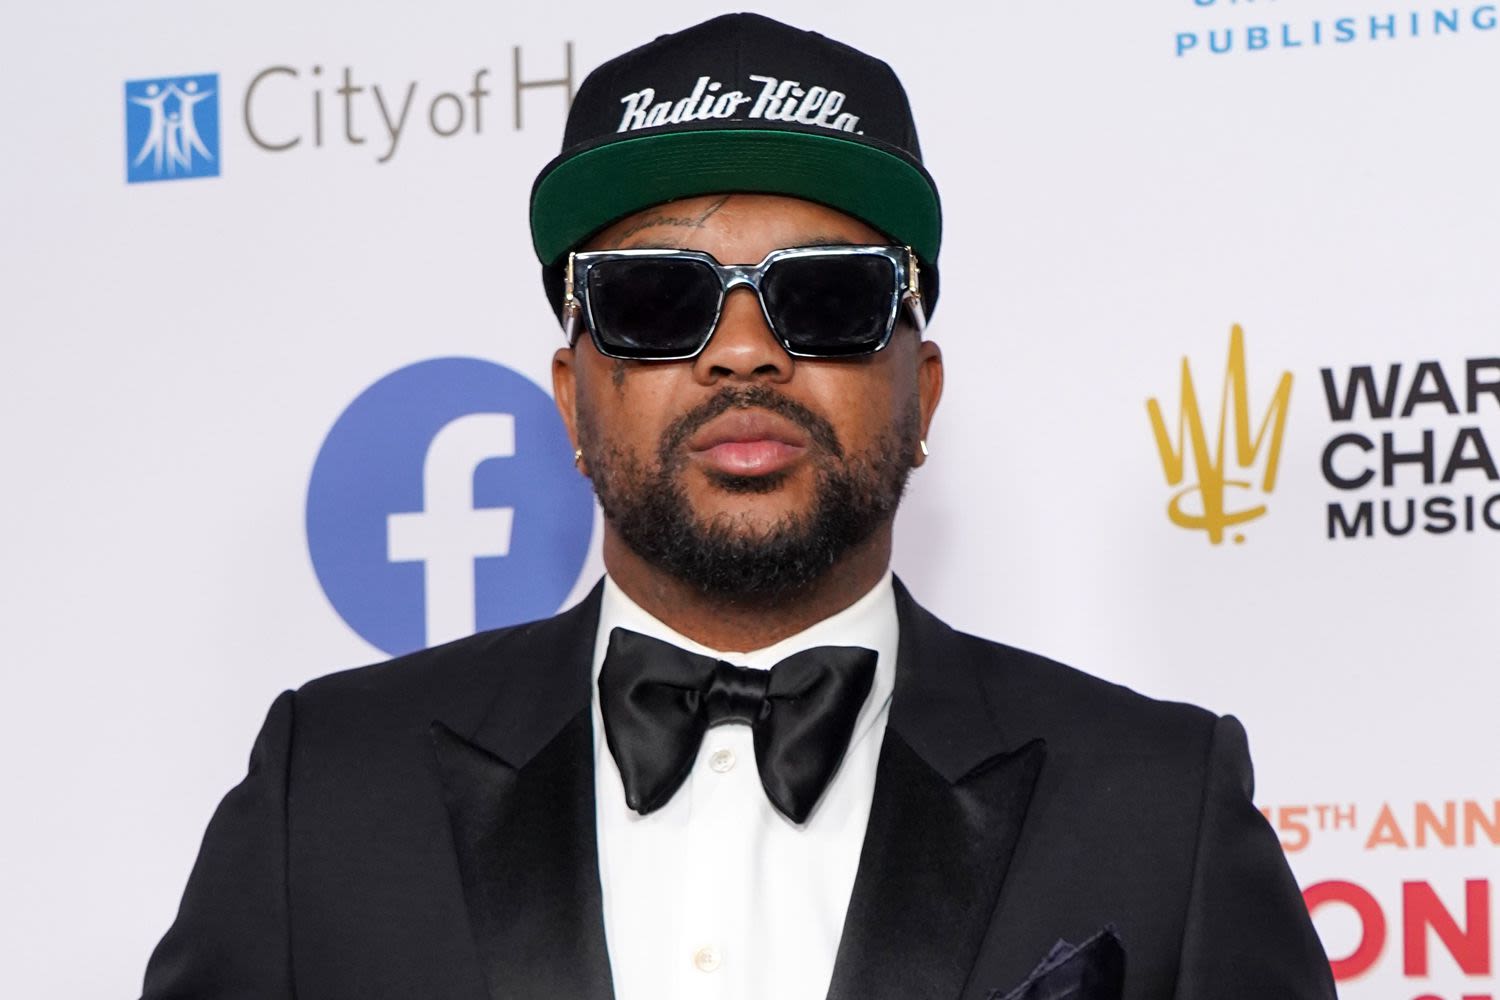 The-Dream Sued by Former Protégée for Alleged Rape, Sex Trafficking and Assault